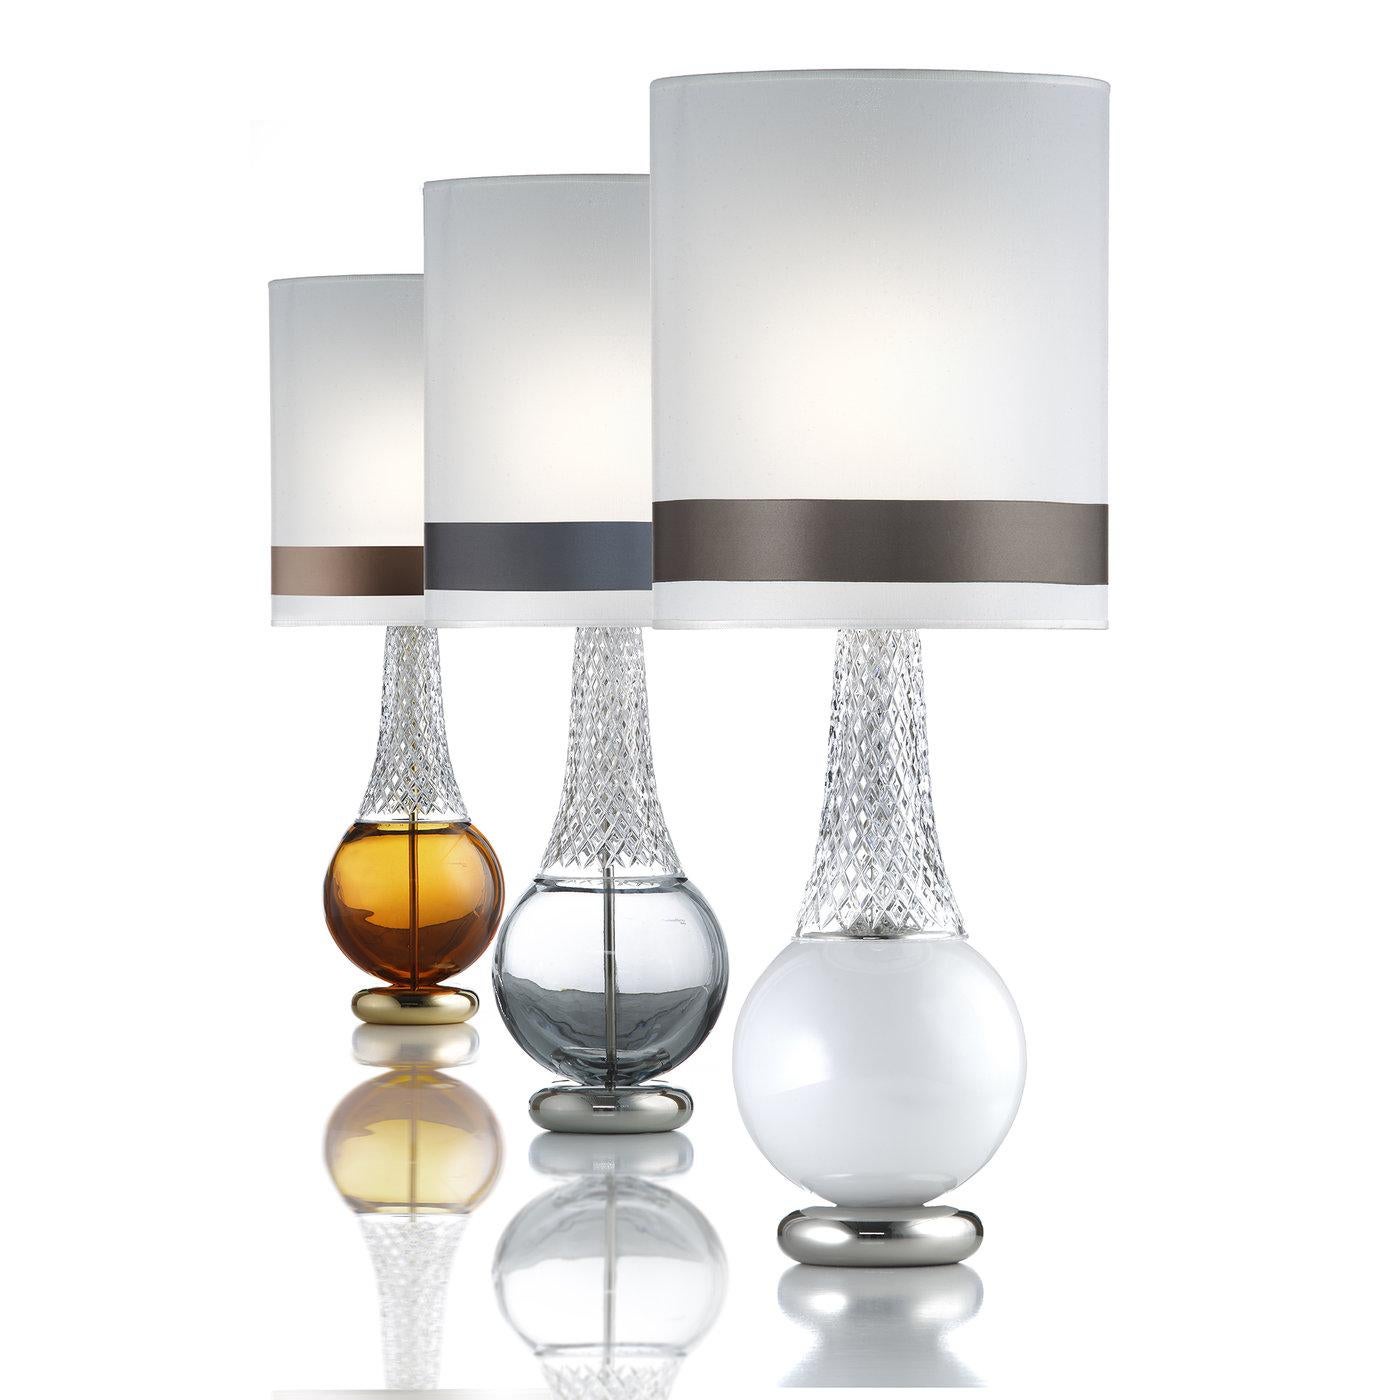 This superb table lamp is a striking example of exquisite craftsmanship and modern design. The structure in metal with a polished nickel finish rests on a round base on which the handcut 24 lead Italian crystal creates two entirely different